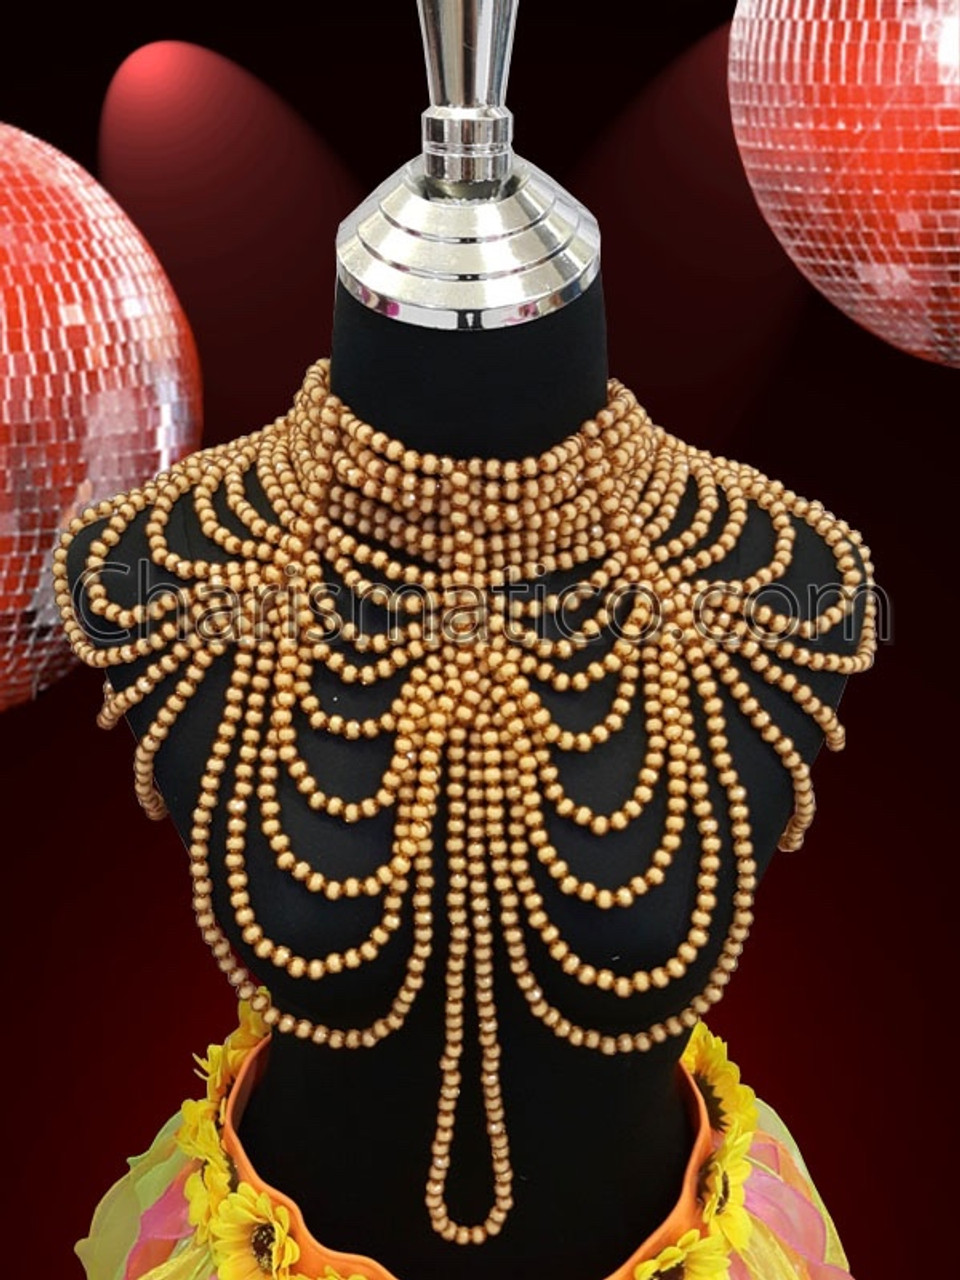 Imitation Jewellery Manufacturers Suppliers From Bangalore